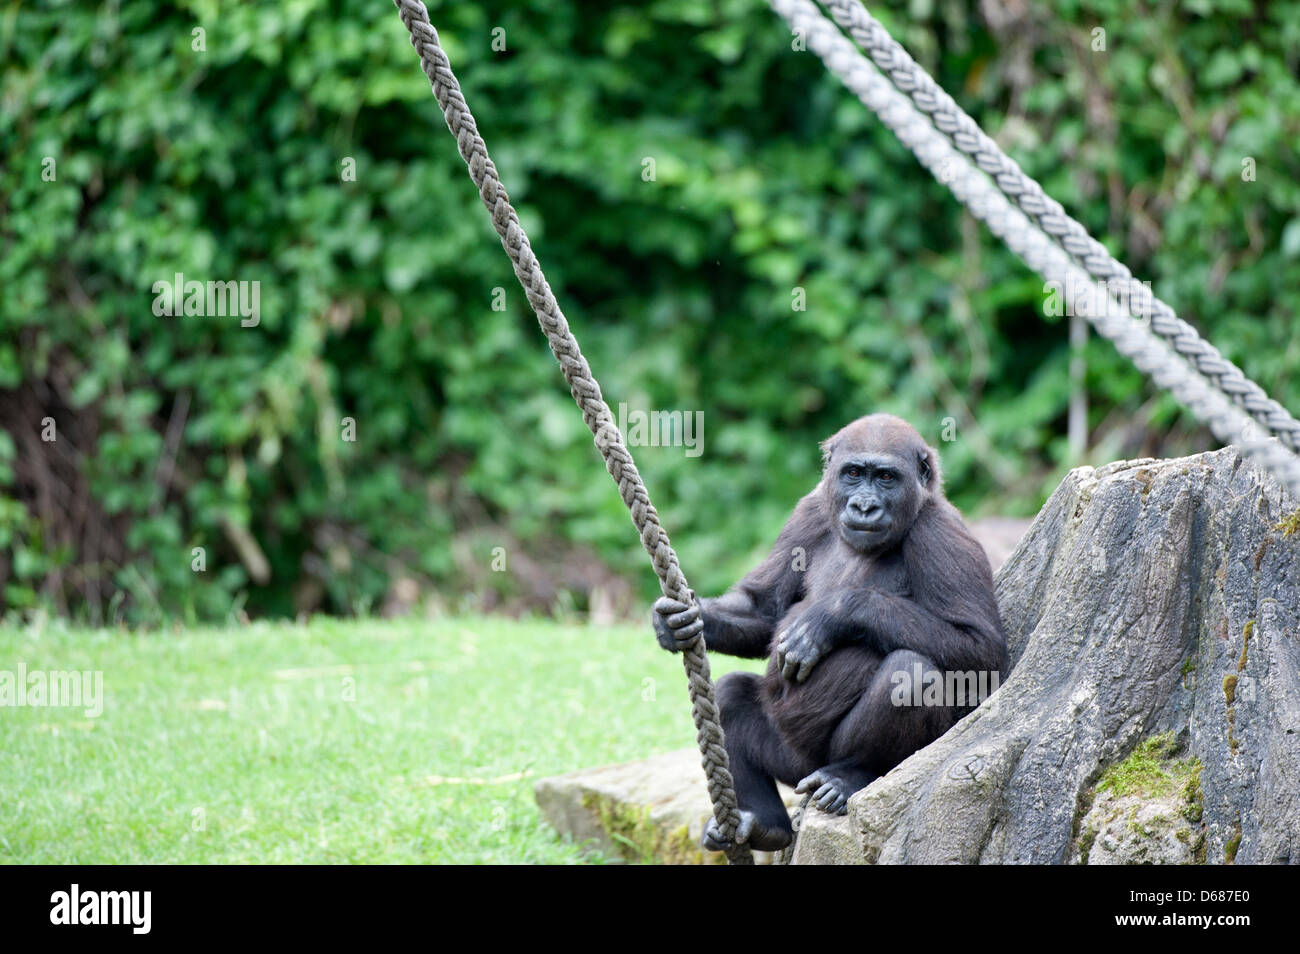 A gorilla sits at the zoo in Hanover, Germany, 03 July 2012. A study by the Great Ape Project published in 'National Geographic' has given German zoos a dismal grade. According to the study, the conditions under which primates are kept is deficient or unsatisfactory. Photo: EMILY WABITSCH Stock Photo